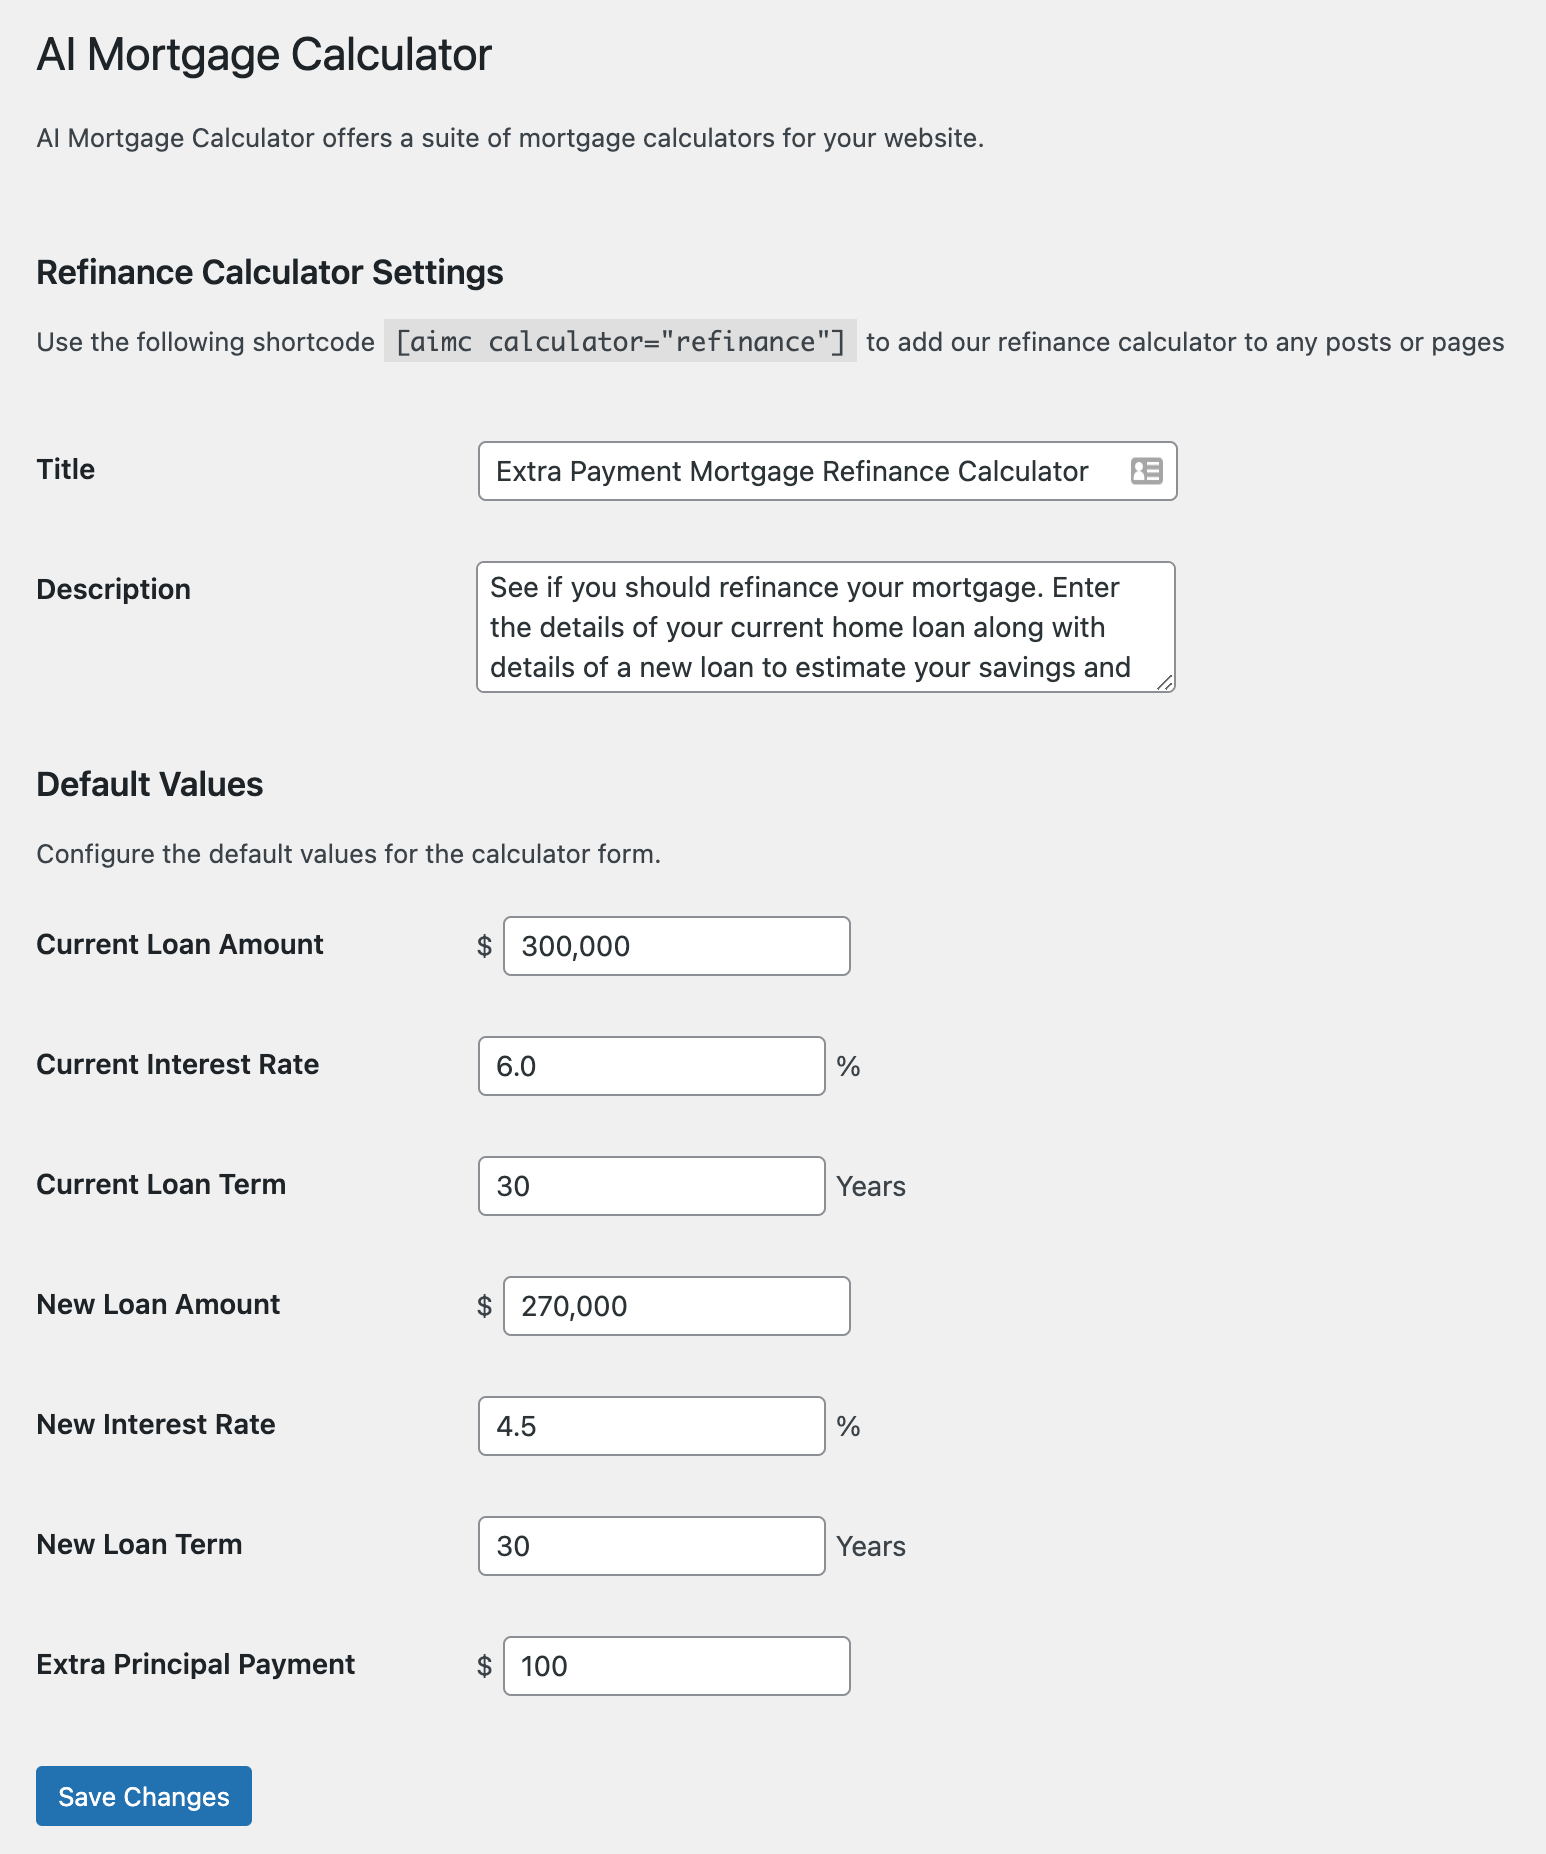 Settings options that allows you to configure the plugin